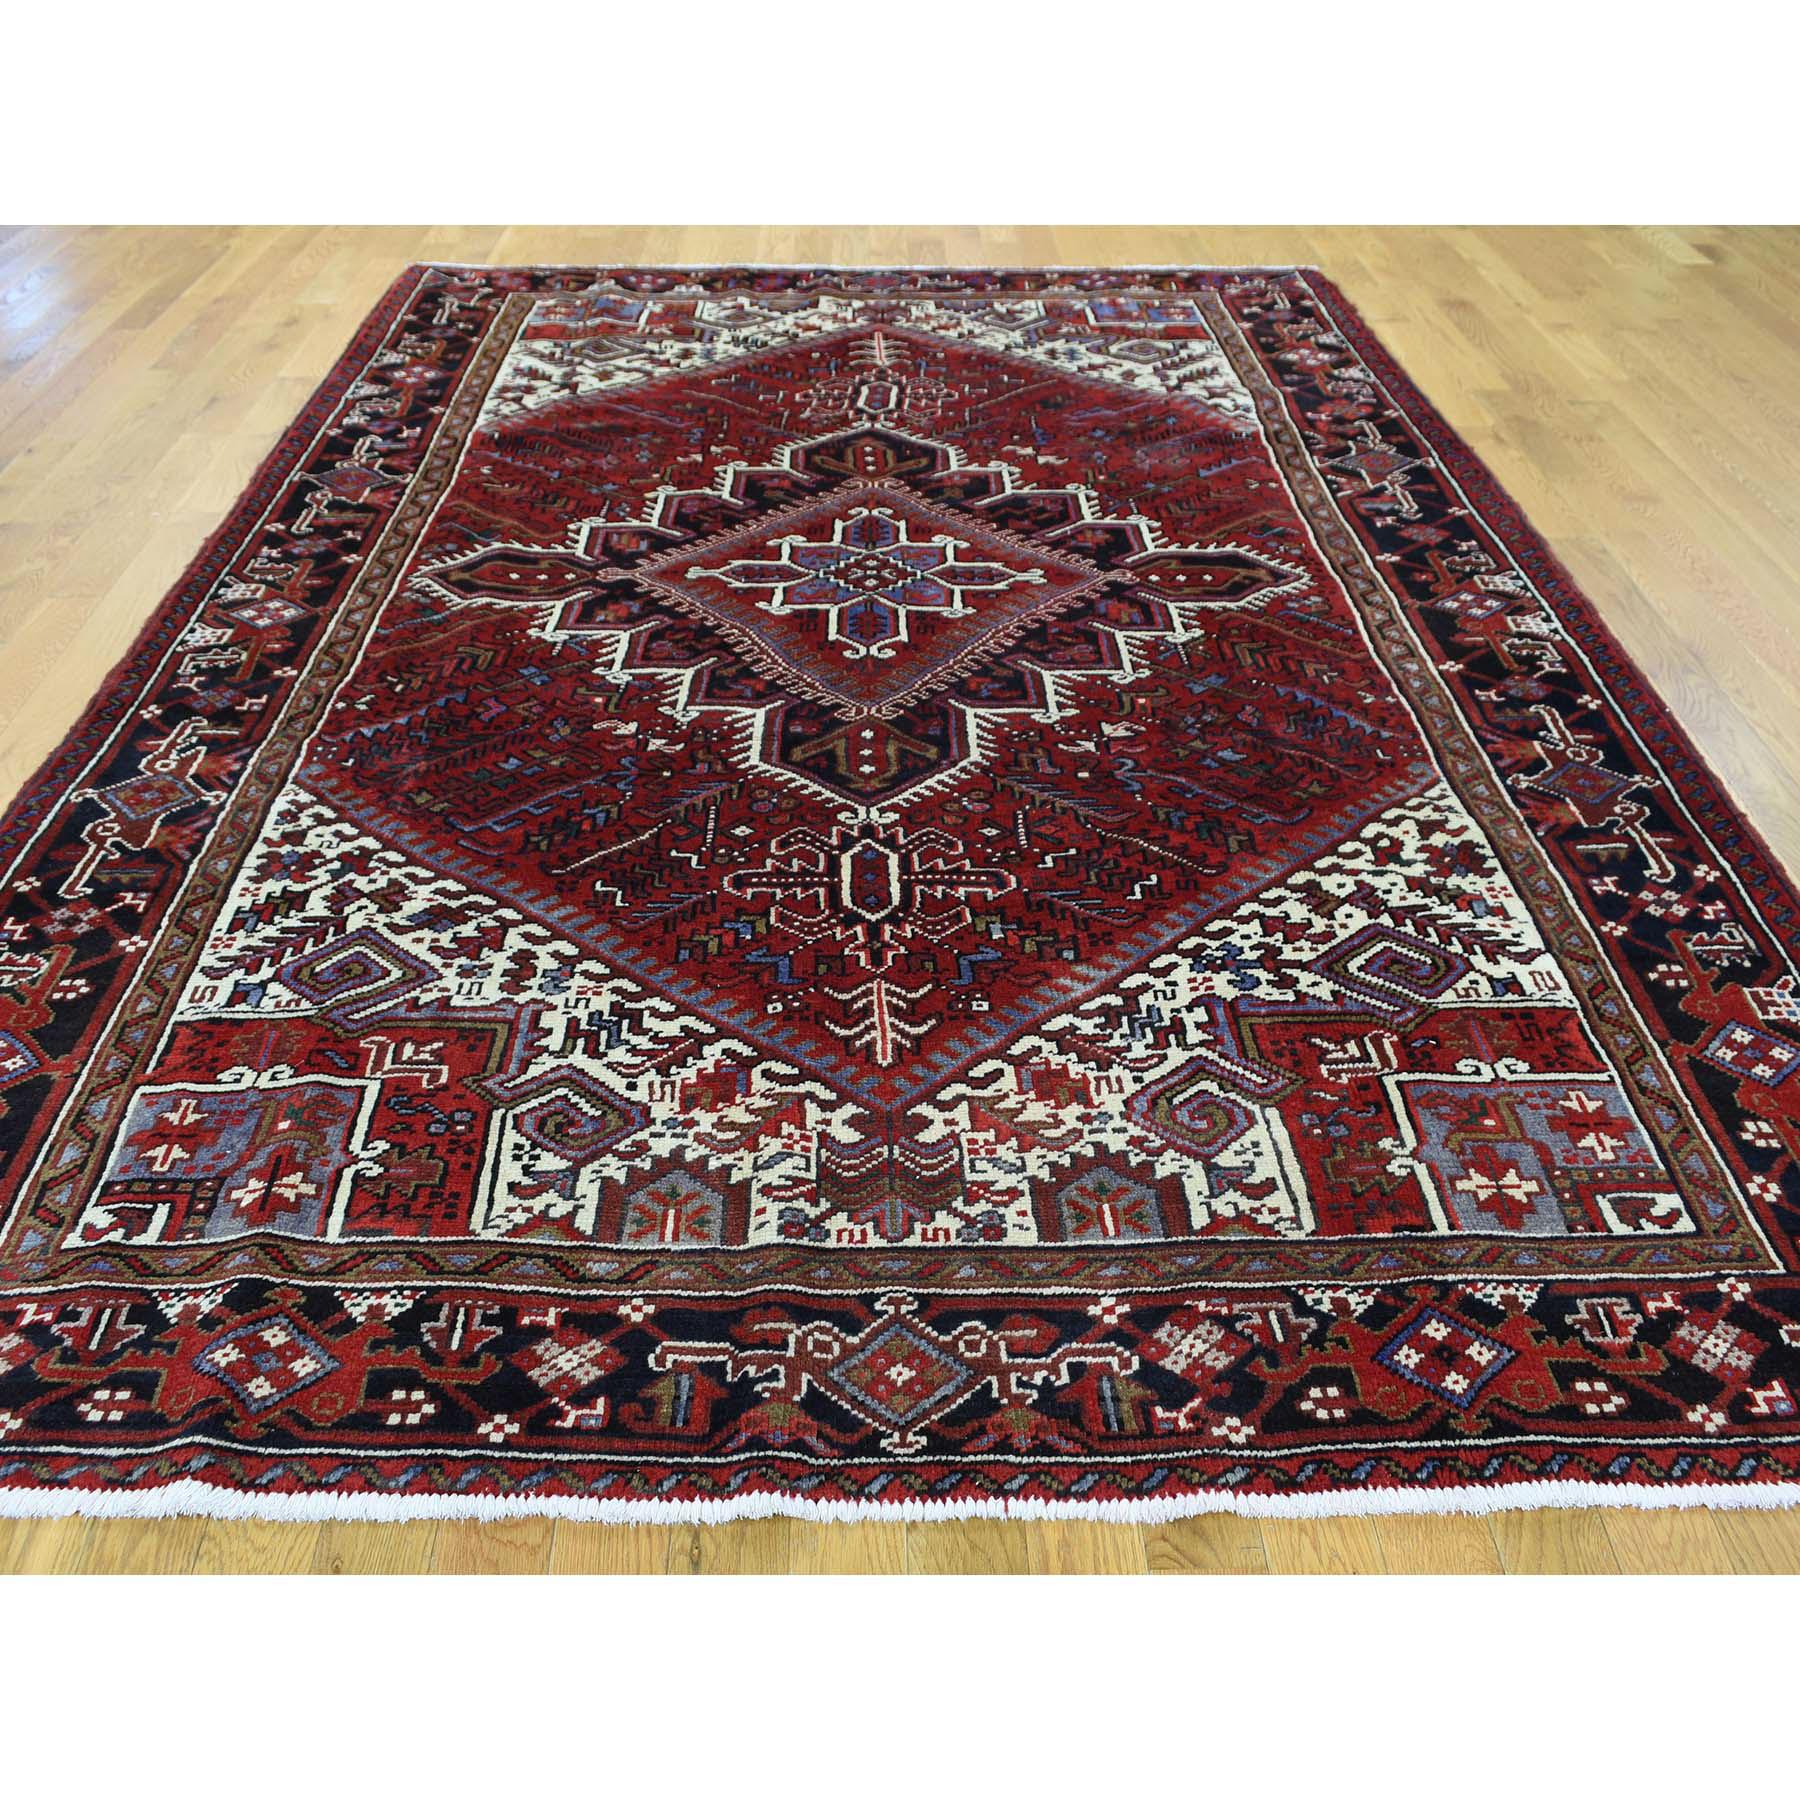 This is a truly genuine one-of-a-kind full pile semi antique Persian Heriz excellent condition rug. It was made in the centuries-old Persian weaving craftsmanship techniques by expert artisans. Measures: 6'7